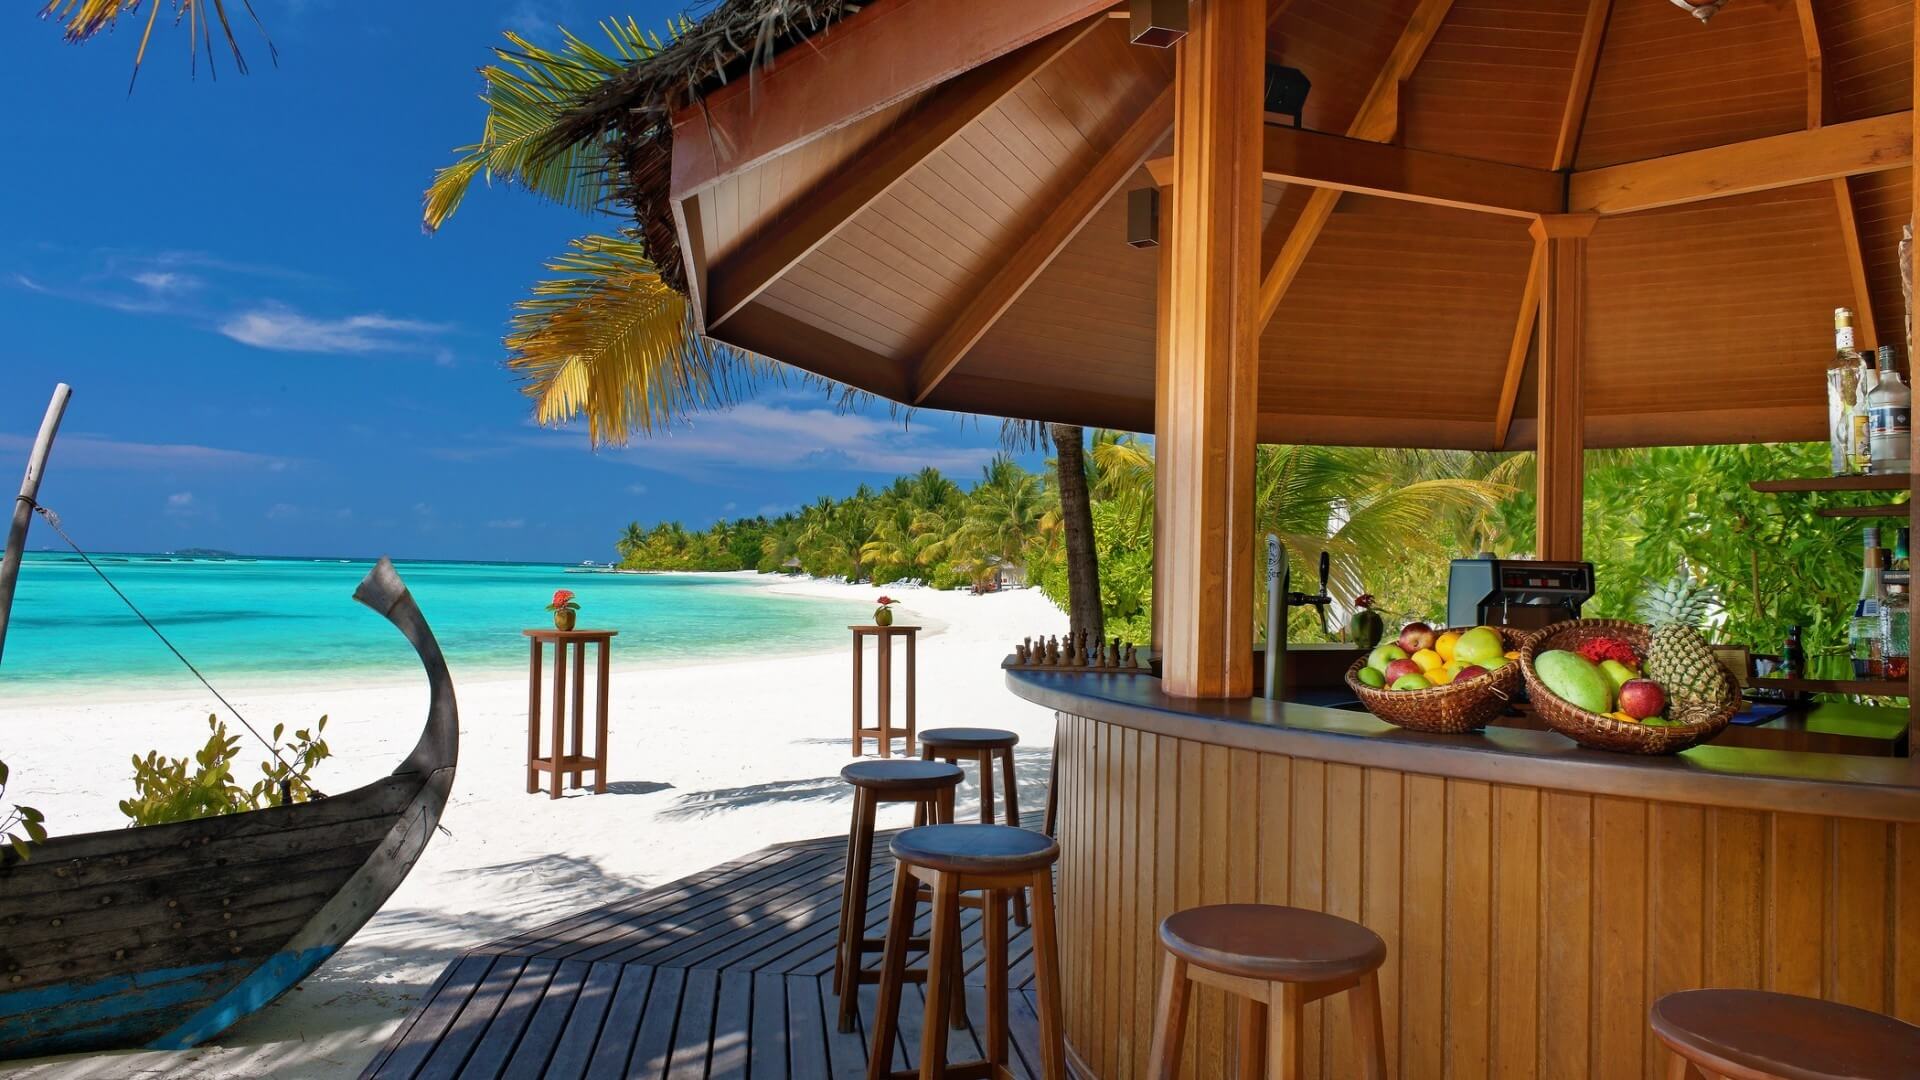 Winter 5 Star Maldives Holiday Travel & Tour Package